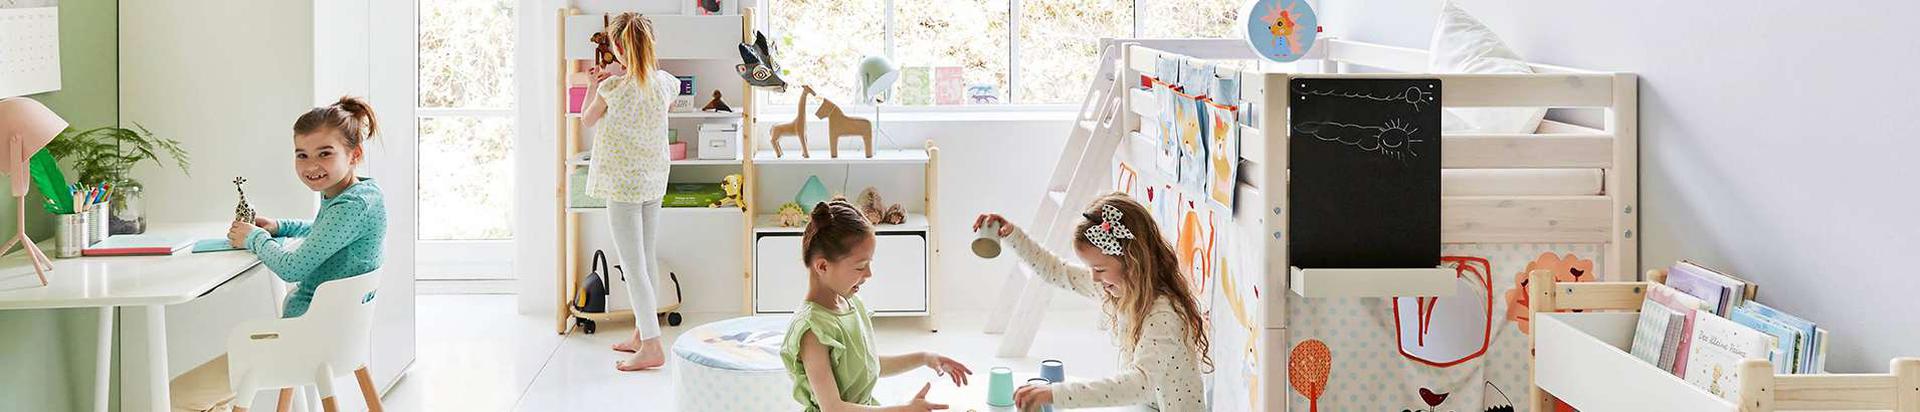 Explore our wide selection of genuine, Danish design for the kids\' room. Flexible furniture that can grow with your child - from toddler stage to their teenage years. Toys and interiors made with your child\'s development in mind ✔Safe design ✔Certified materials ✔Long-lasting products.